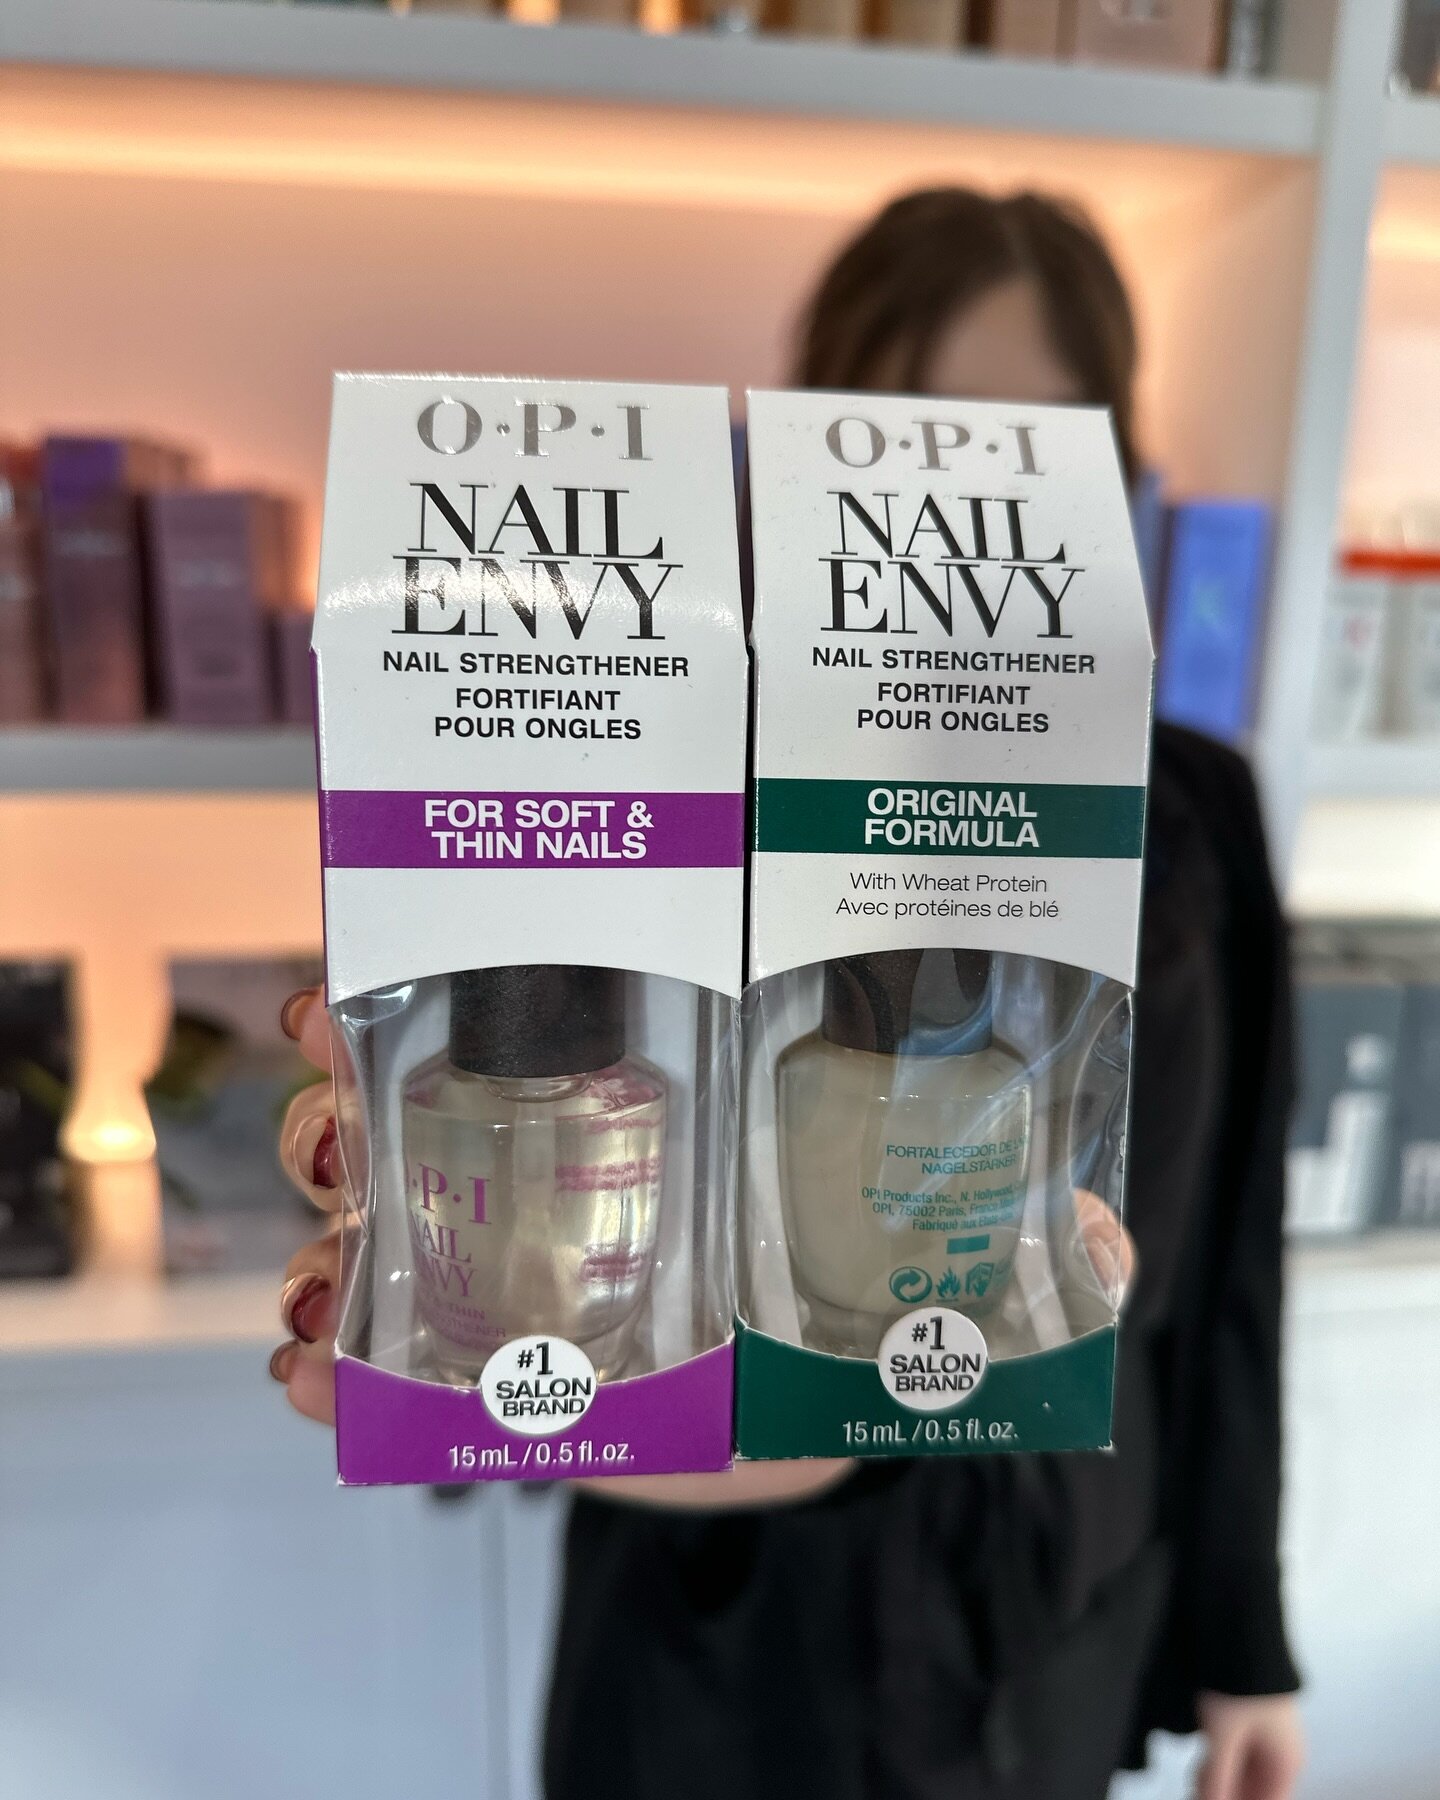 Upgrade your nail game with Nail Envy strengthener and get some amazing deals on Dermalogica and HD brows. Don&rsquo;t miss out, come and explore the sale basket by reception! 🗑️